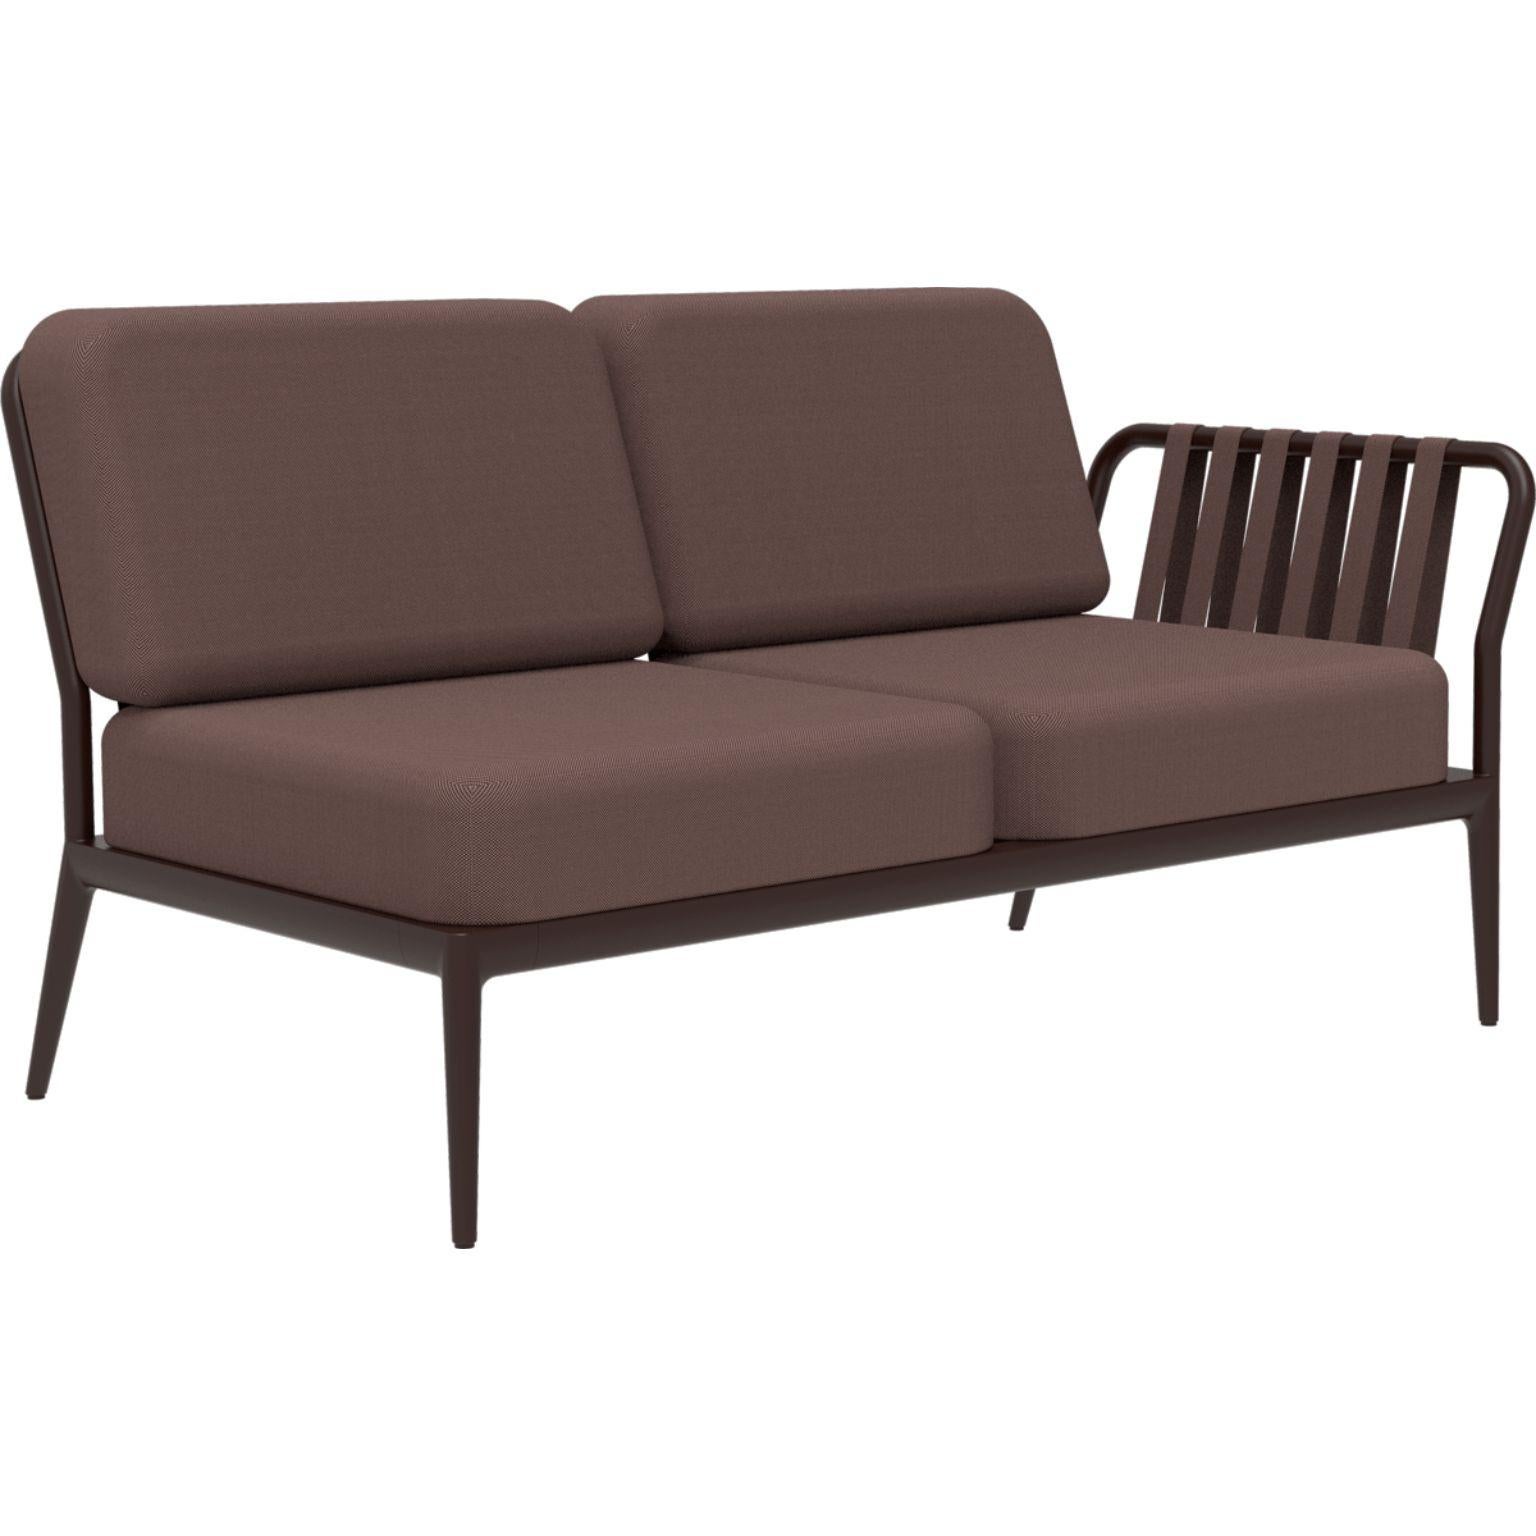 Ribbons chocolate double left Modular sofa by Mowee
Dimensions: D83 x W148 x H81 cm (seat height 42 cm).
Material: Aluminium and upholstery.
Weight: 29 kg
Also available in different colors and finishes.

An unmistakable collection for its